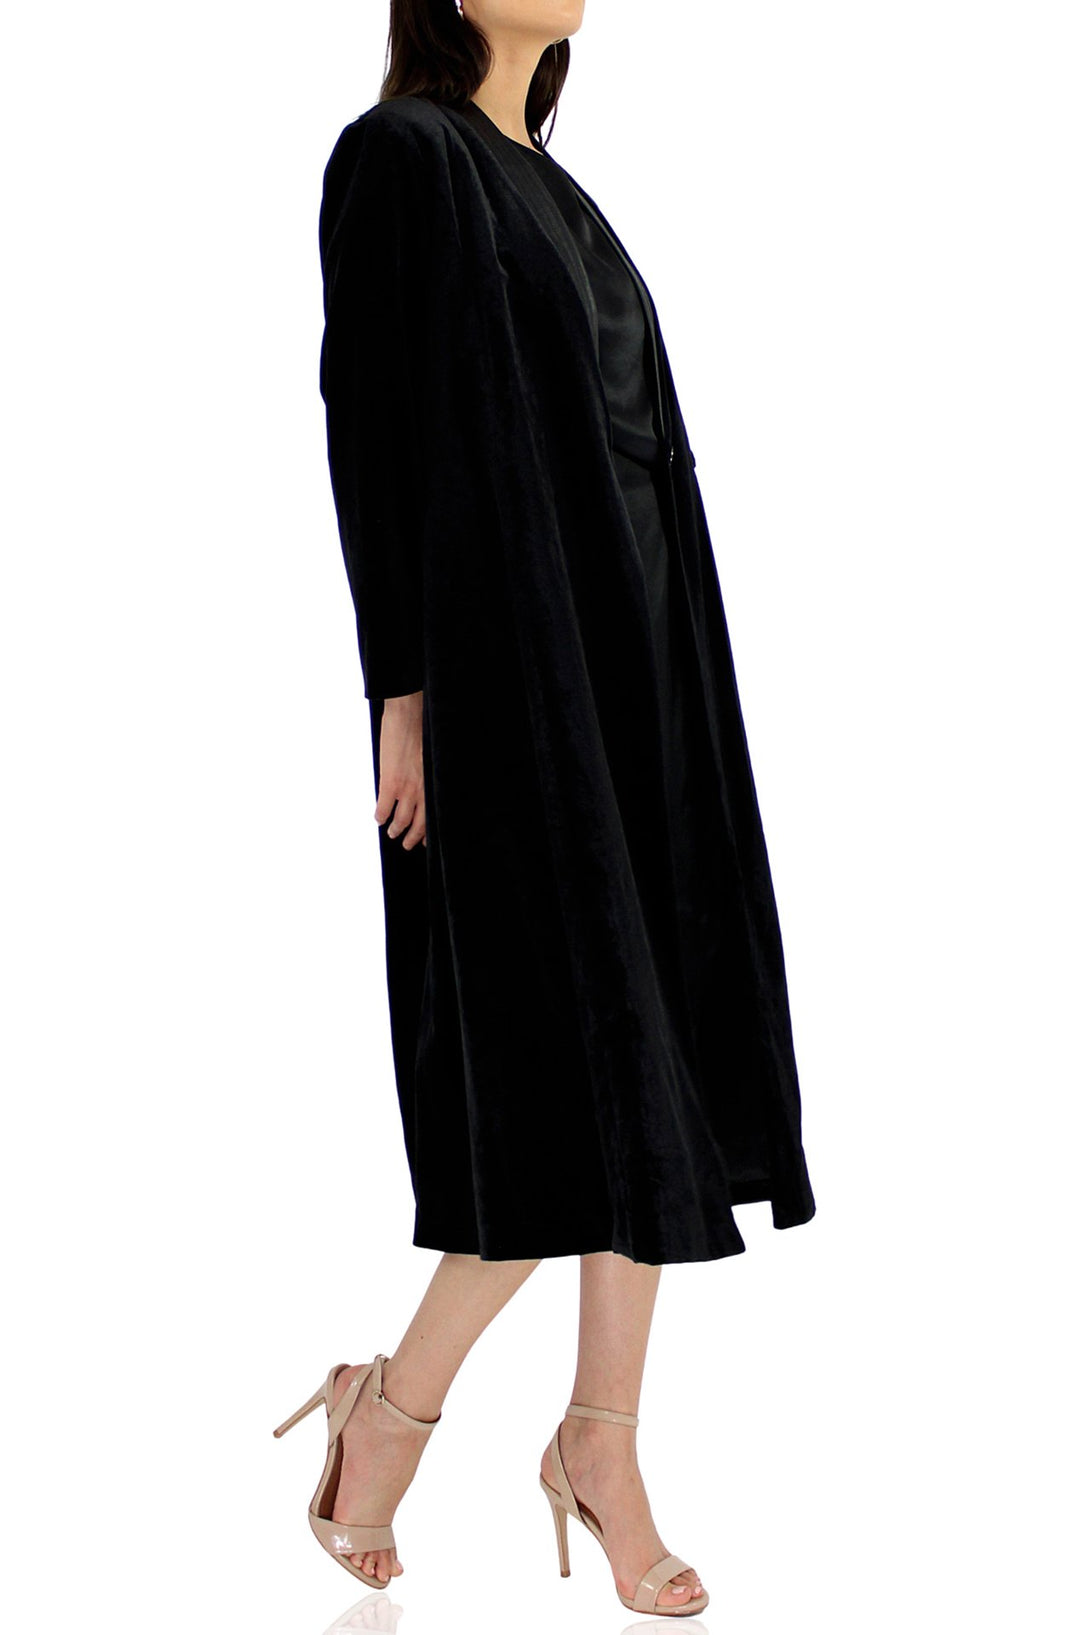 Womens-Long-Belted-Robe-By-Kyle-Richard